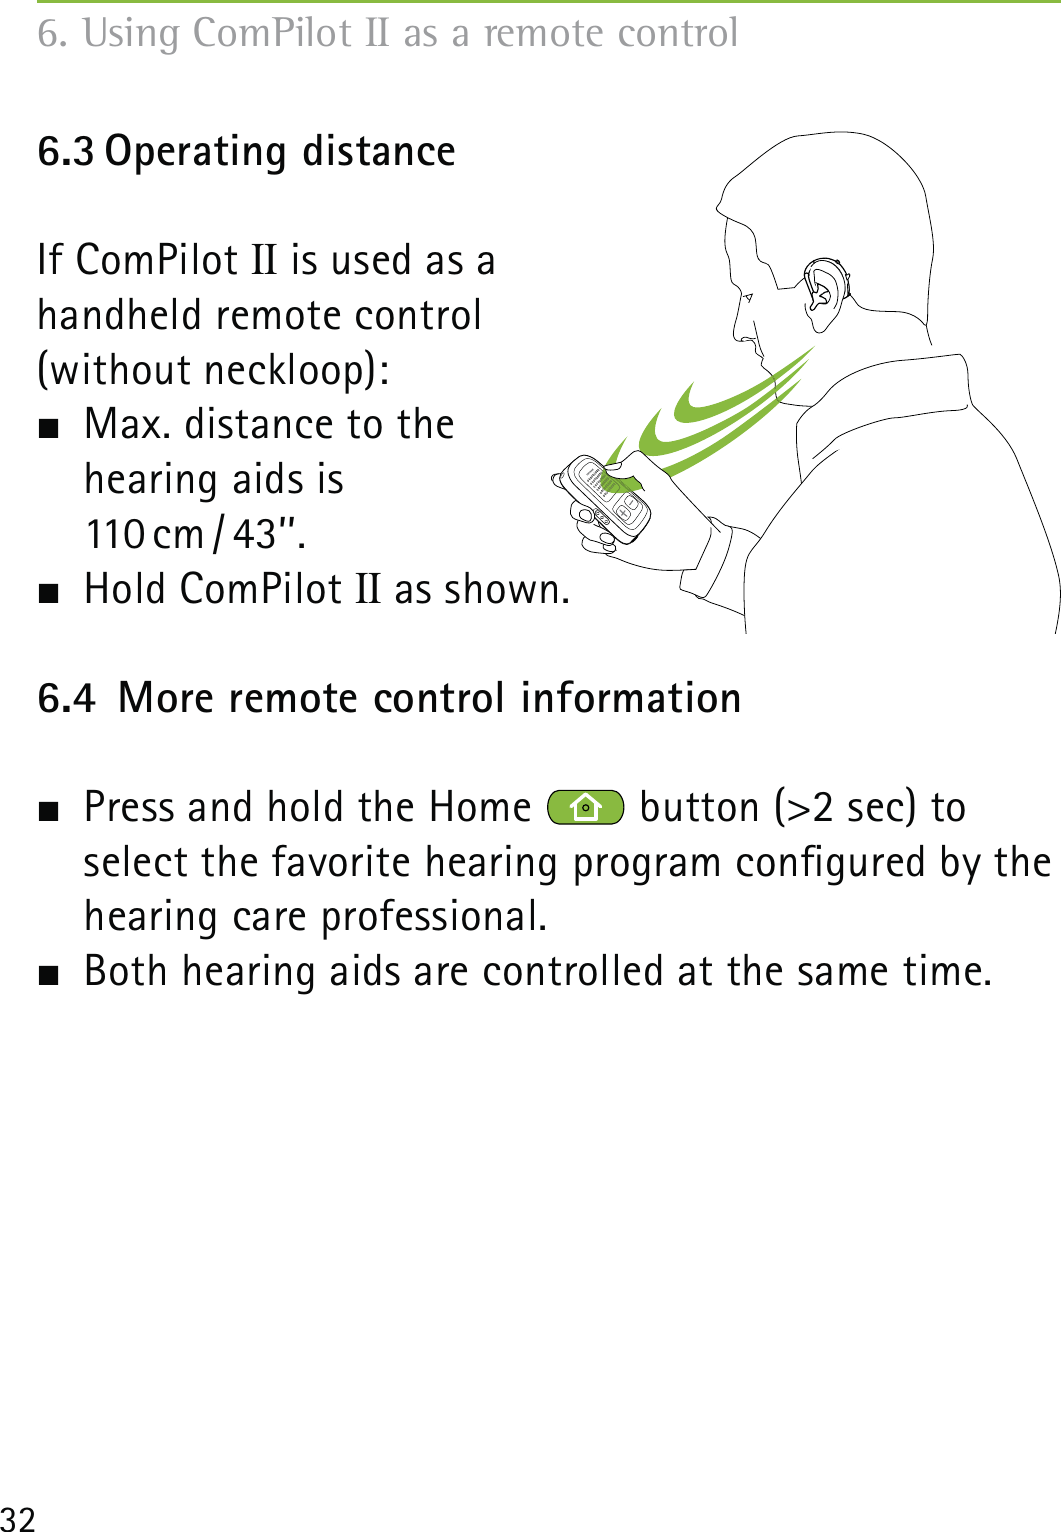 326.3 Operating  distanceIf ComPilot II is used as a  handheld remote control  (without neckloop):  Max. distance to the  hearing aids is  110 cm / 43’’.  Hold ComPilot II as shown.6.4  More remote control information  Press and hold the Home   button (&gt;2 sec) to  select the favorite hearing program congured by the hearing care professional.  Both hearing aids are controlled at the same time.6. Using ComPilot II as a remote control